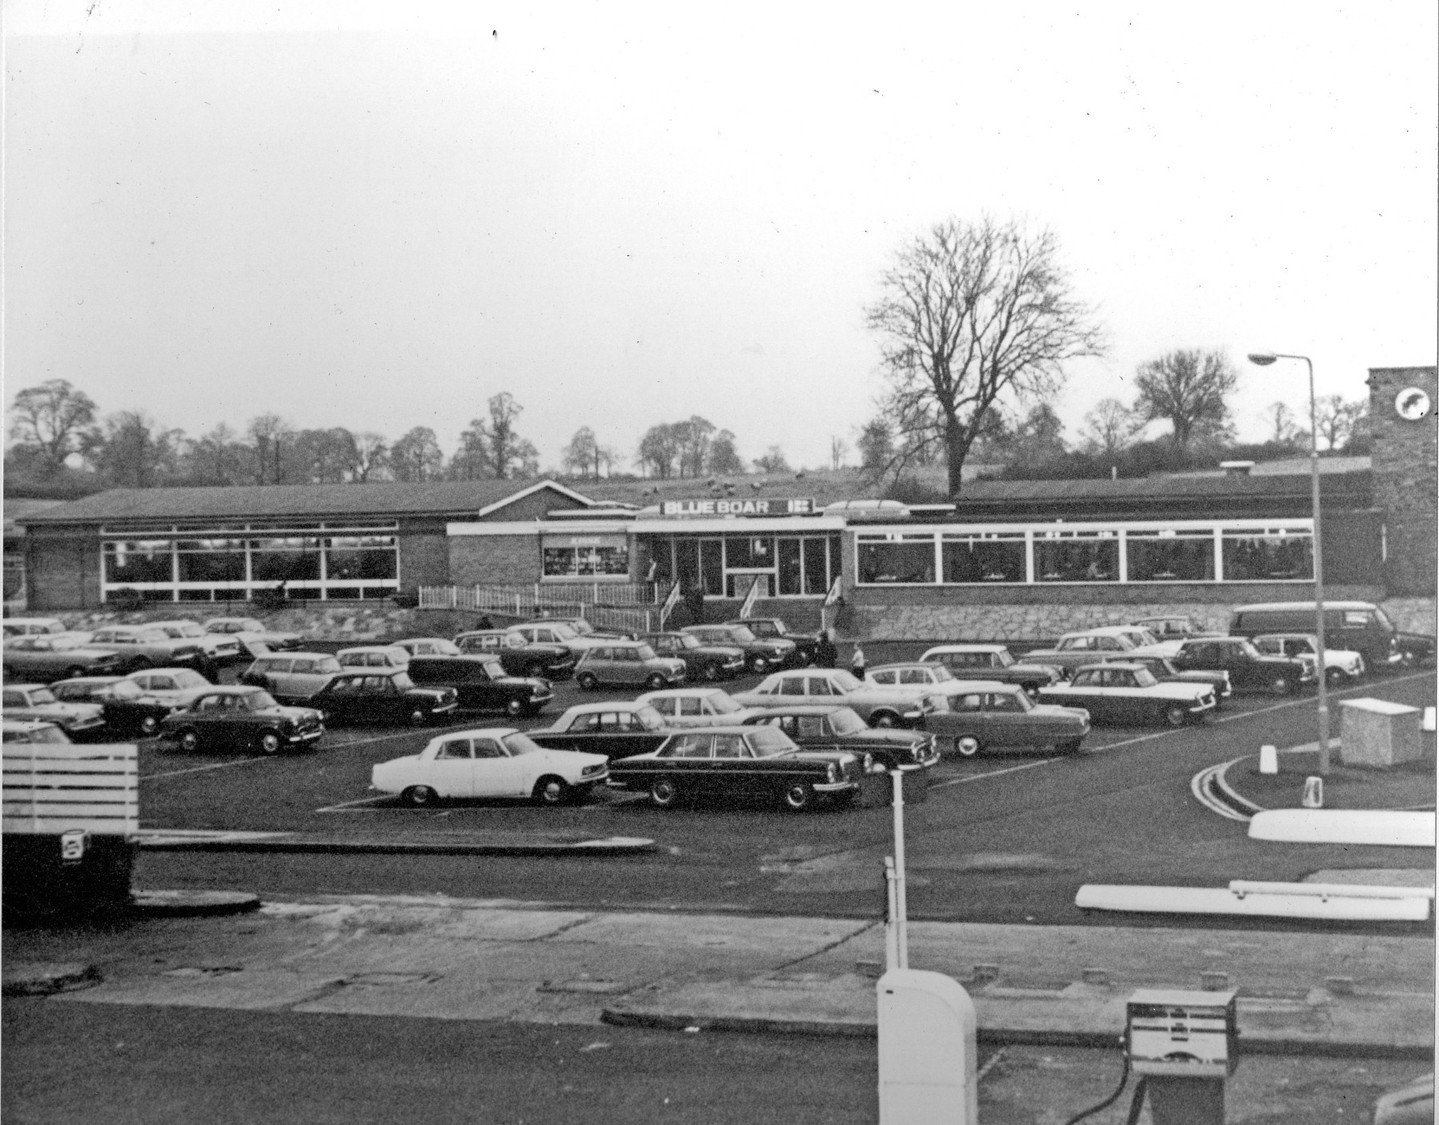 Did you know that Britain's oldest motorway services hits retirement age this year? Watford Gap opened in 1959, on the same day as the M1.⁠
⁠
Find out more at the link in bio.⁠
⁠
======================================⁠
⁠
Follow @detour_roadtrips for 